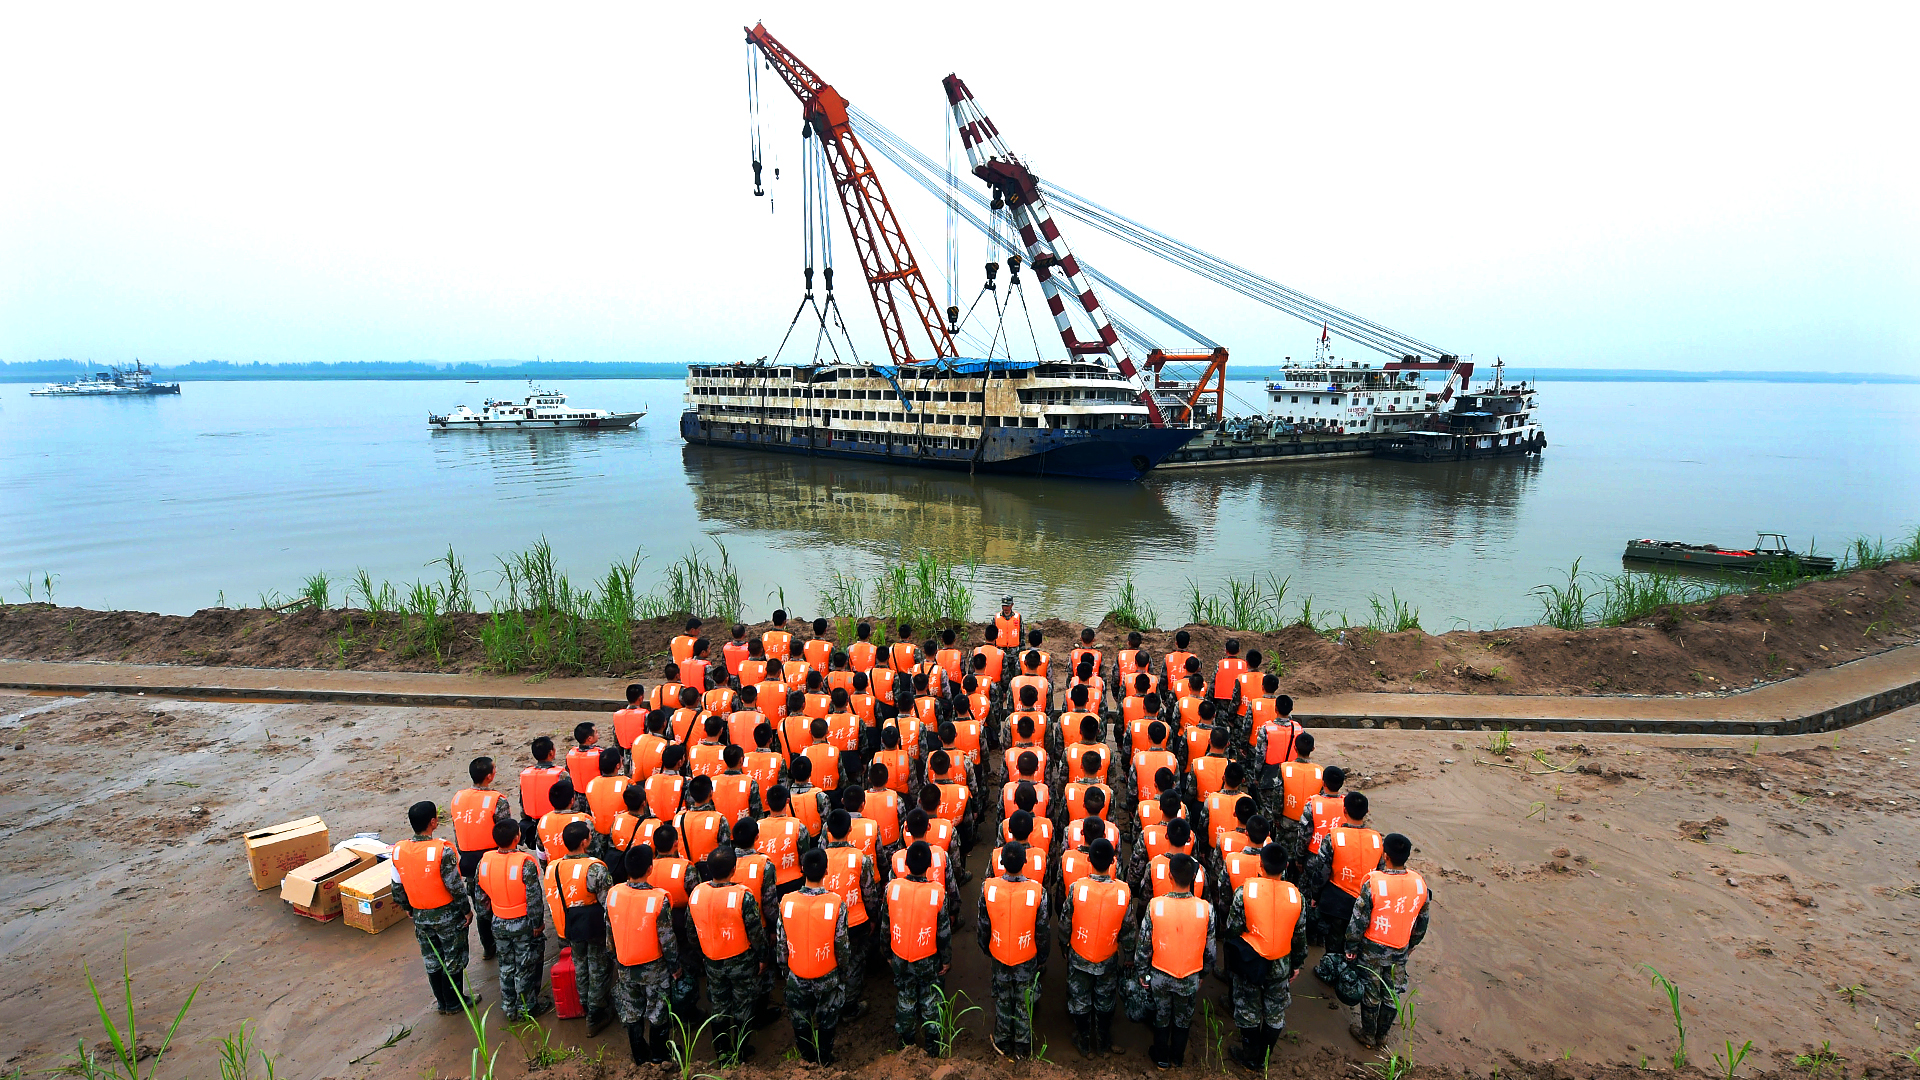 Officers and soldiers stand in silent tribute to those who died aboard the Eastern Star. Photo: Xinhua